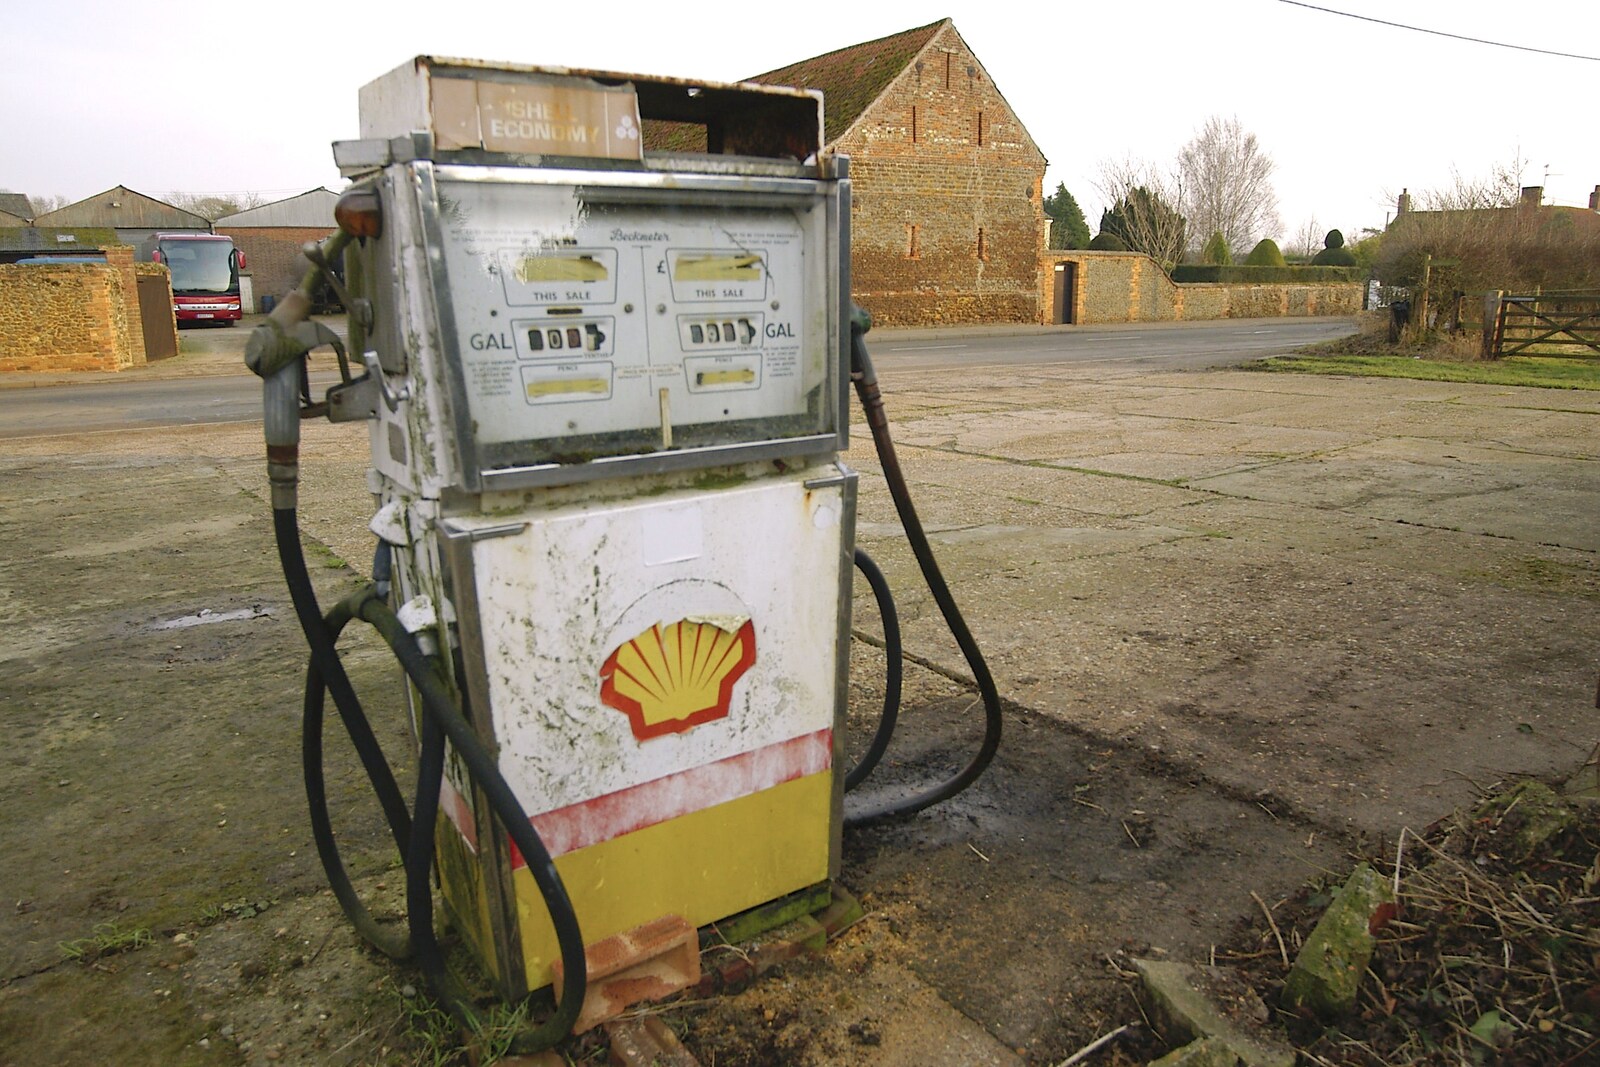 The old Shell petrol pump from Dom in da Chapel, Safeway Chickens and Evil Supermarkets, Harleston and Grimston - 15th January 2006